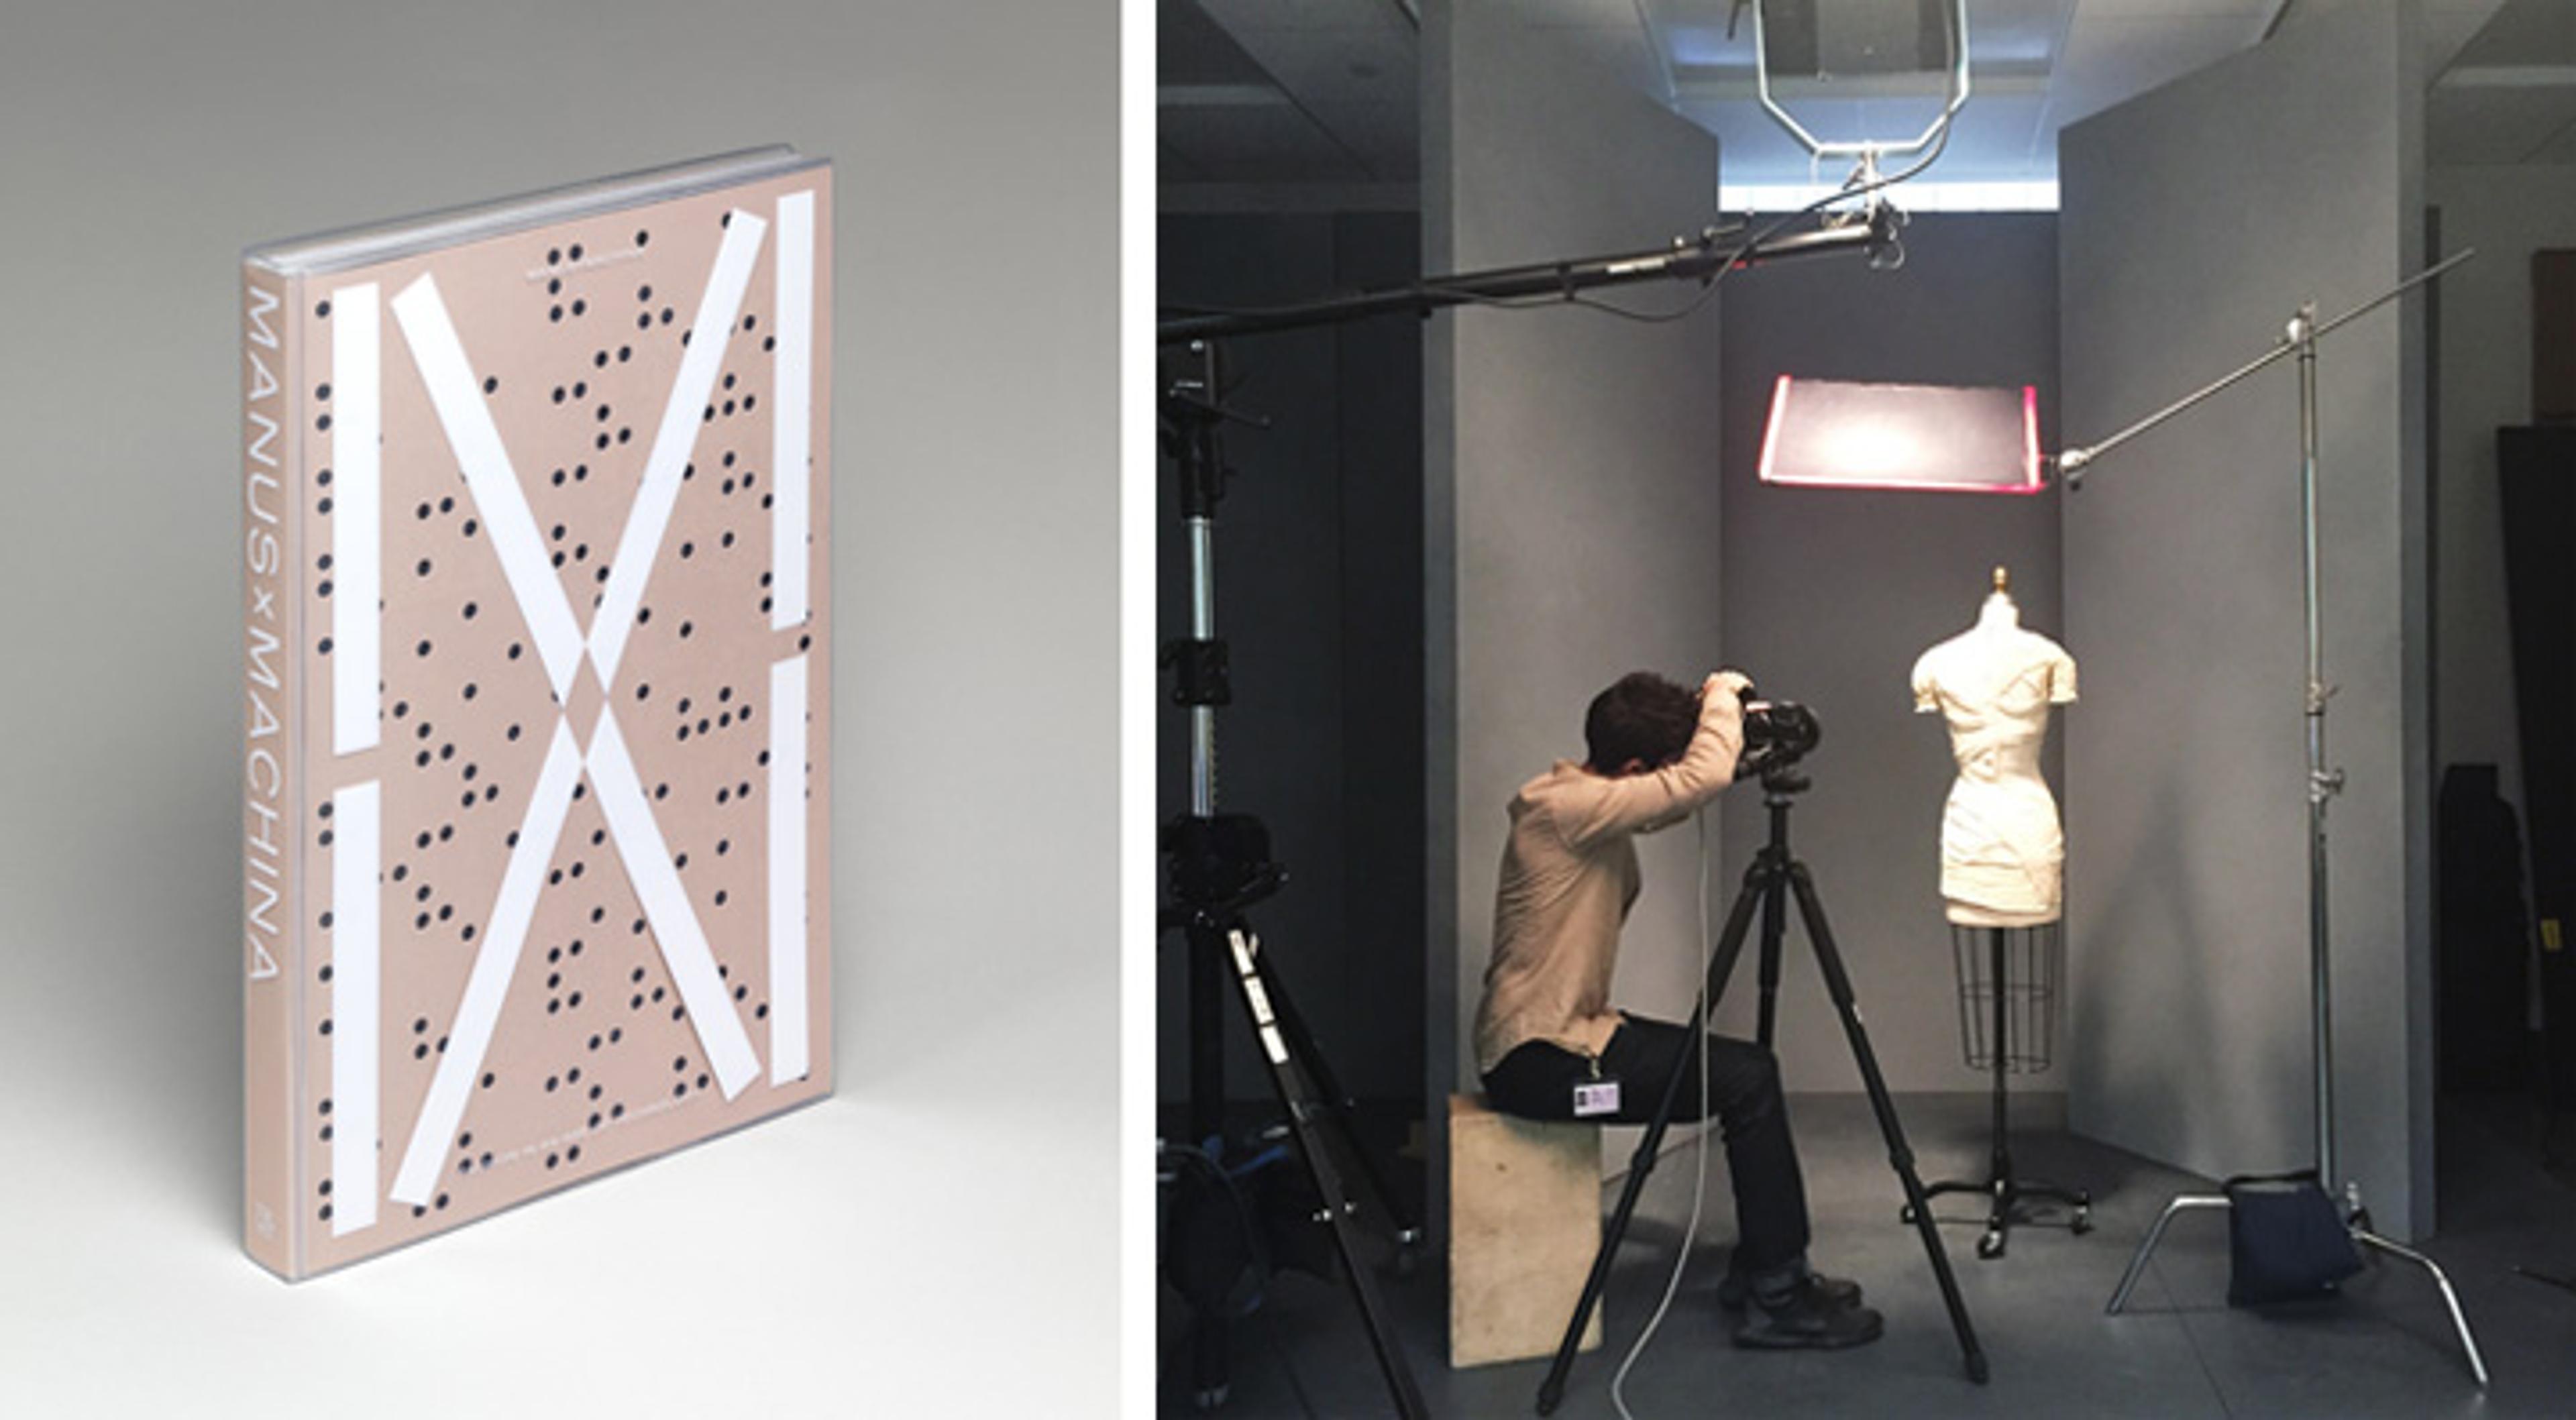 Photo showing the catalogue cover on the left and Nicholas Cope photographing a dress on the right